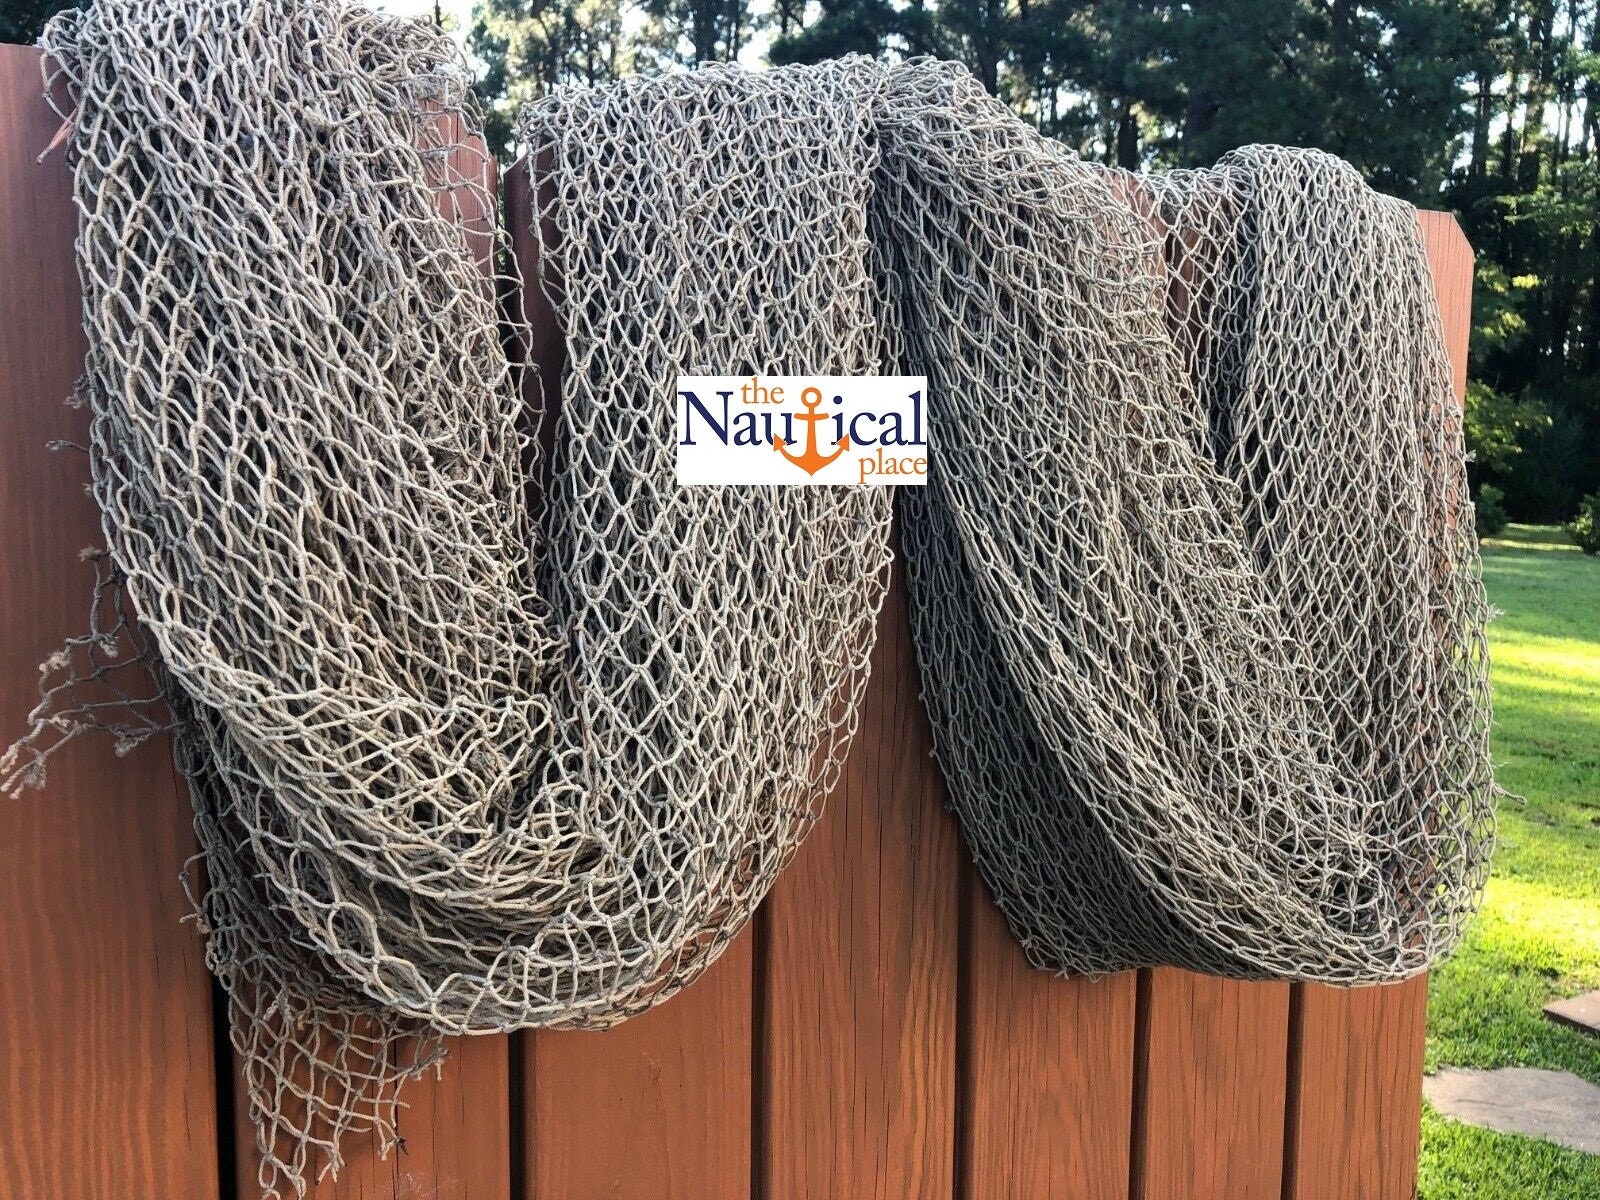 Authentic Fish Net Cut From Real Commercial Fishing Nets - 15 ft x 15 ft  HEAVY Knotted - Used Fishing Net Reclaimed From Fishermen